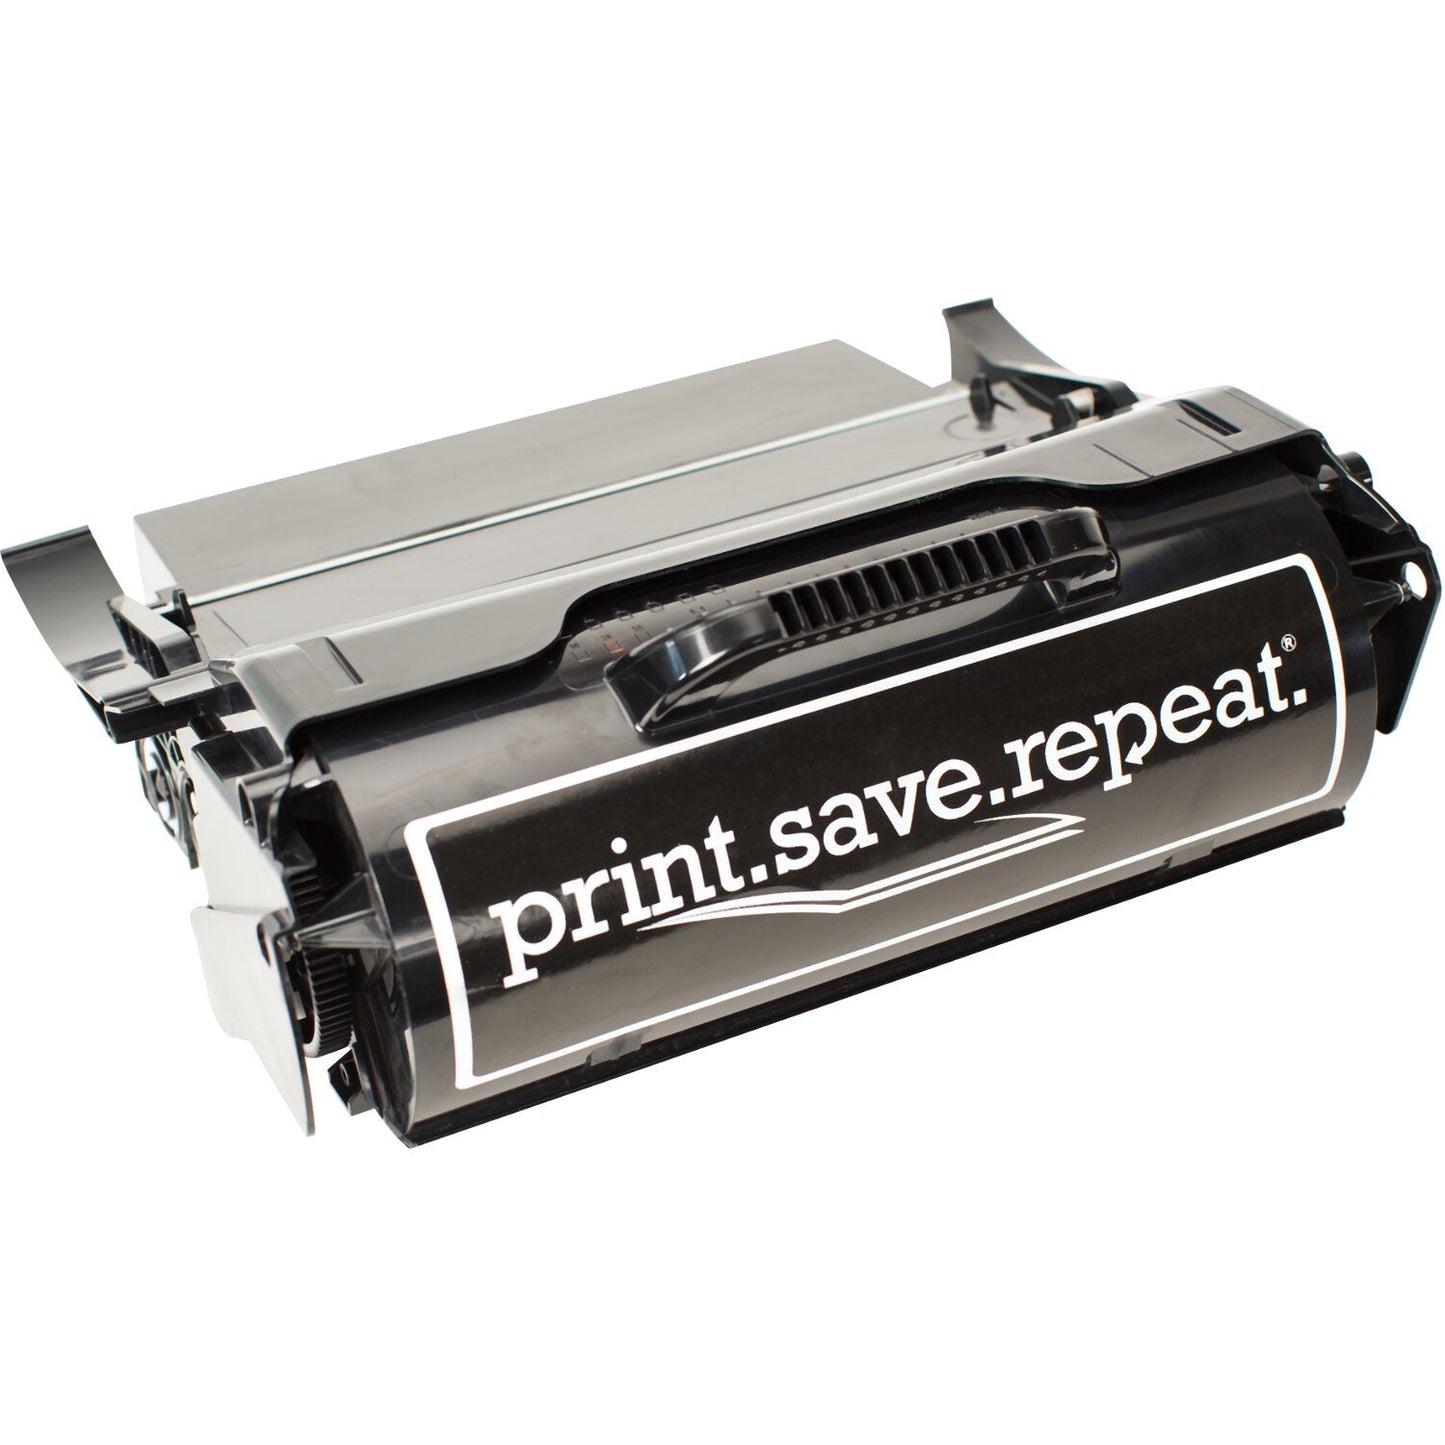 Print.Save.Repeat. Lexmark 24B5708 Extra High Yield Remanufactured Toner Cartridge for T654, T656 [36,000 Pages]